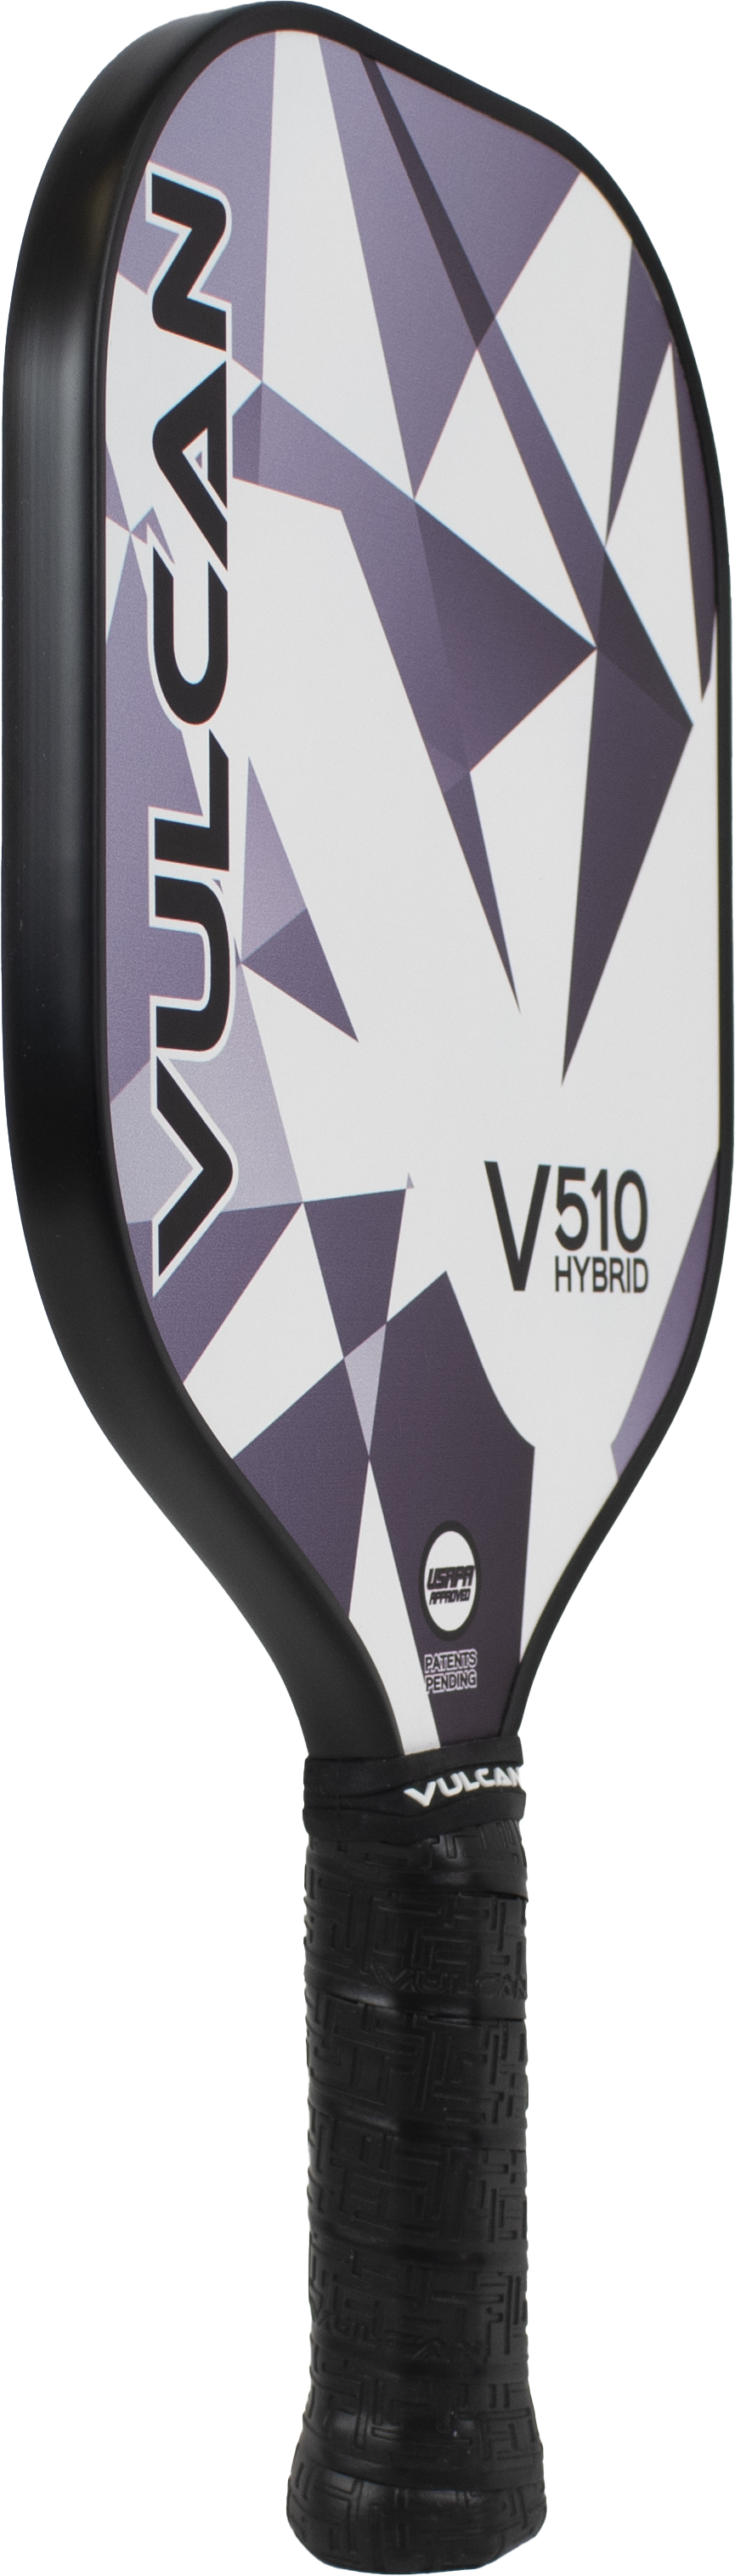 The Vulcan V510 Hybrid Pickleball Paddle is shown on a white background.